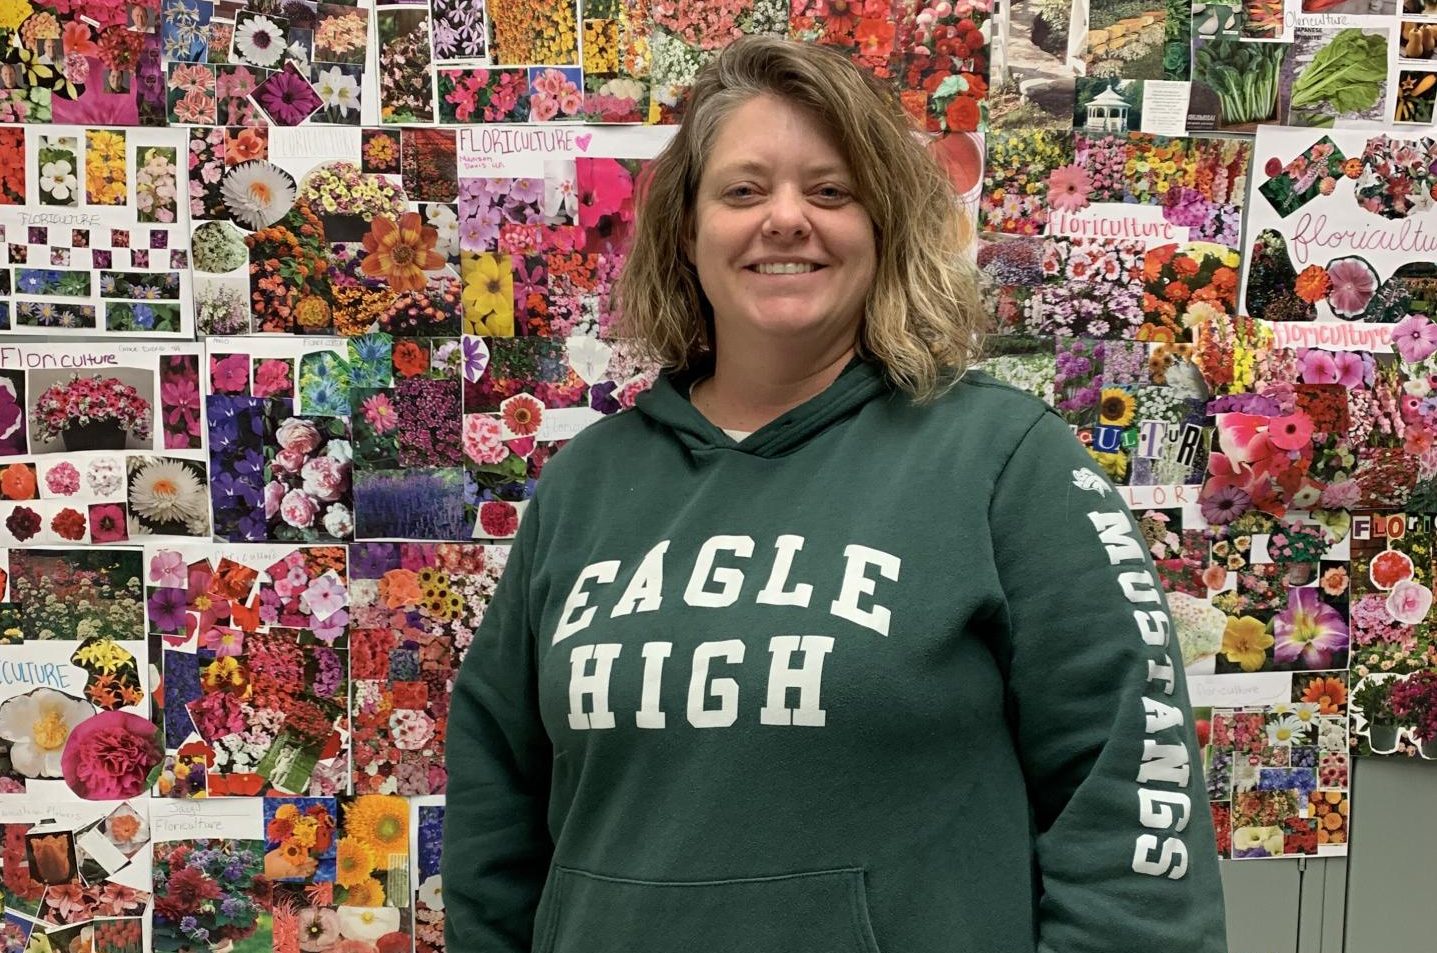  Molly Bell teaches botany and biology. She has been teaching at Eagle High for 18 years. Throughout her time here, she has impacted students in many positive ways. 